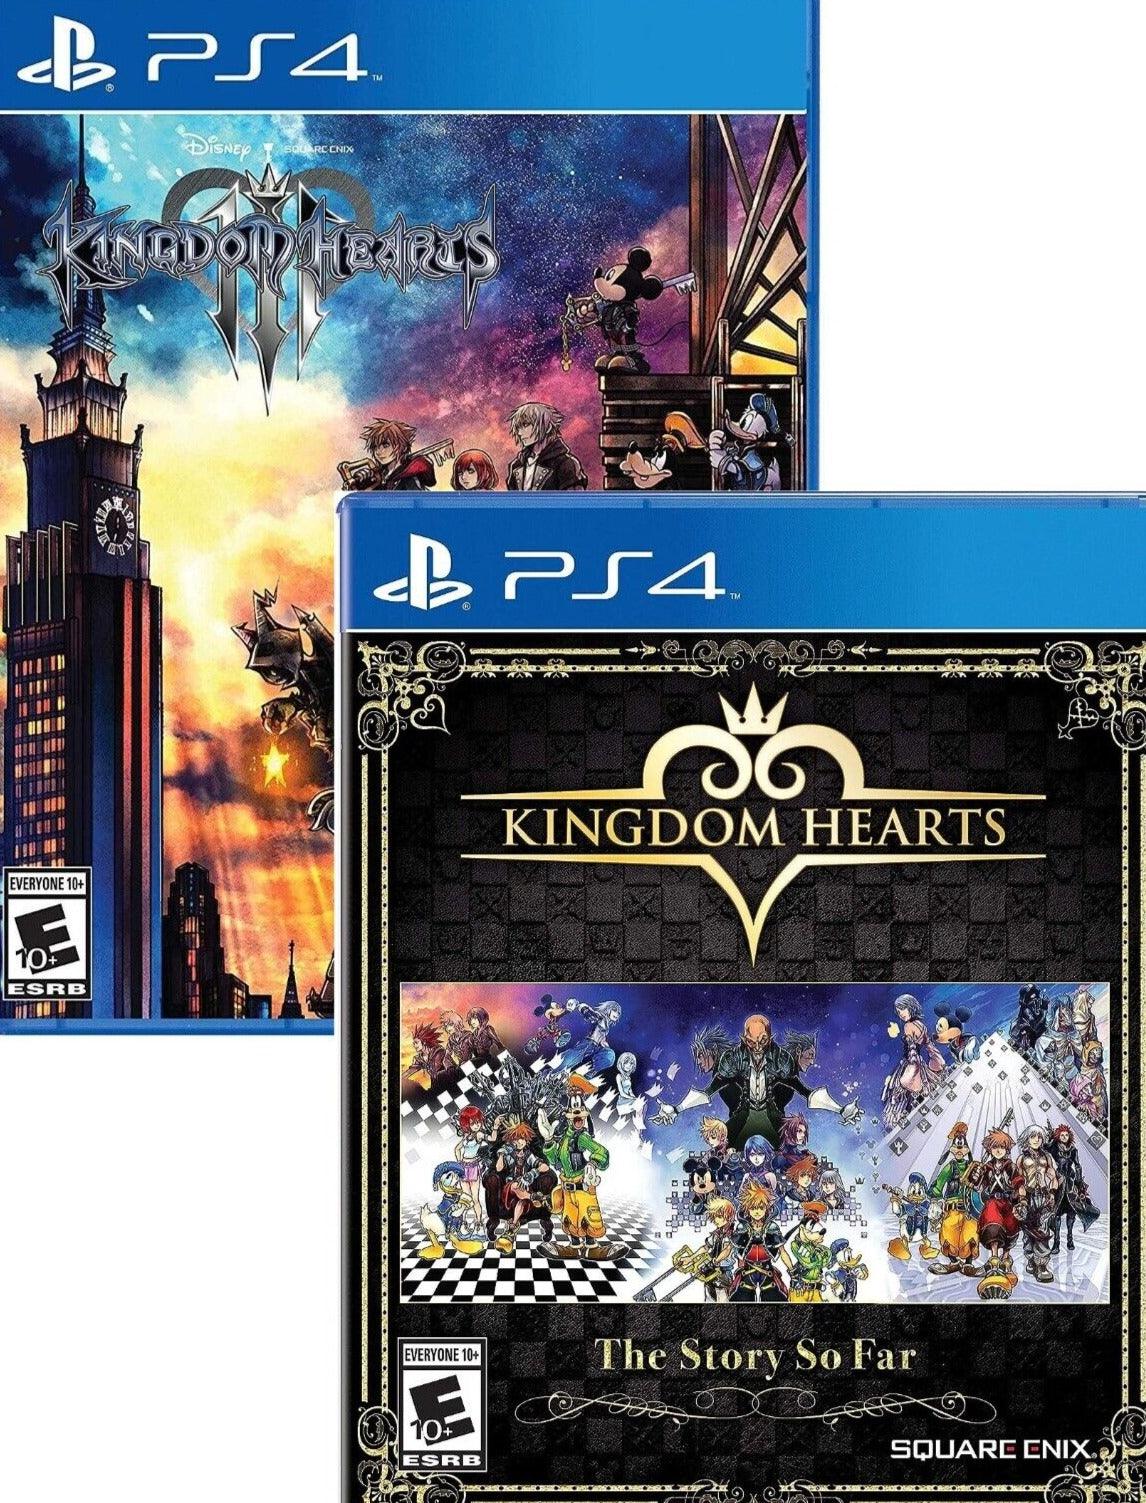 KINGDOM HEARTS All-In-One Package / PS4 /Playstation 4 – GD Games